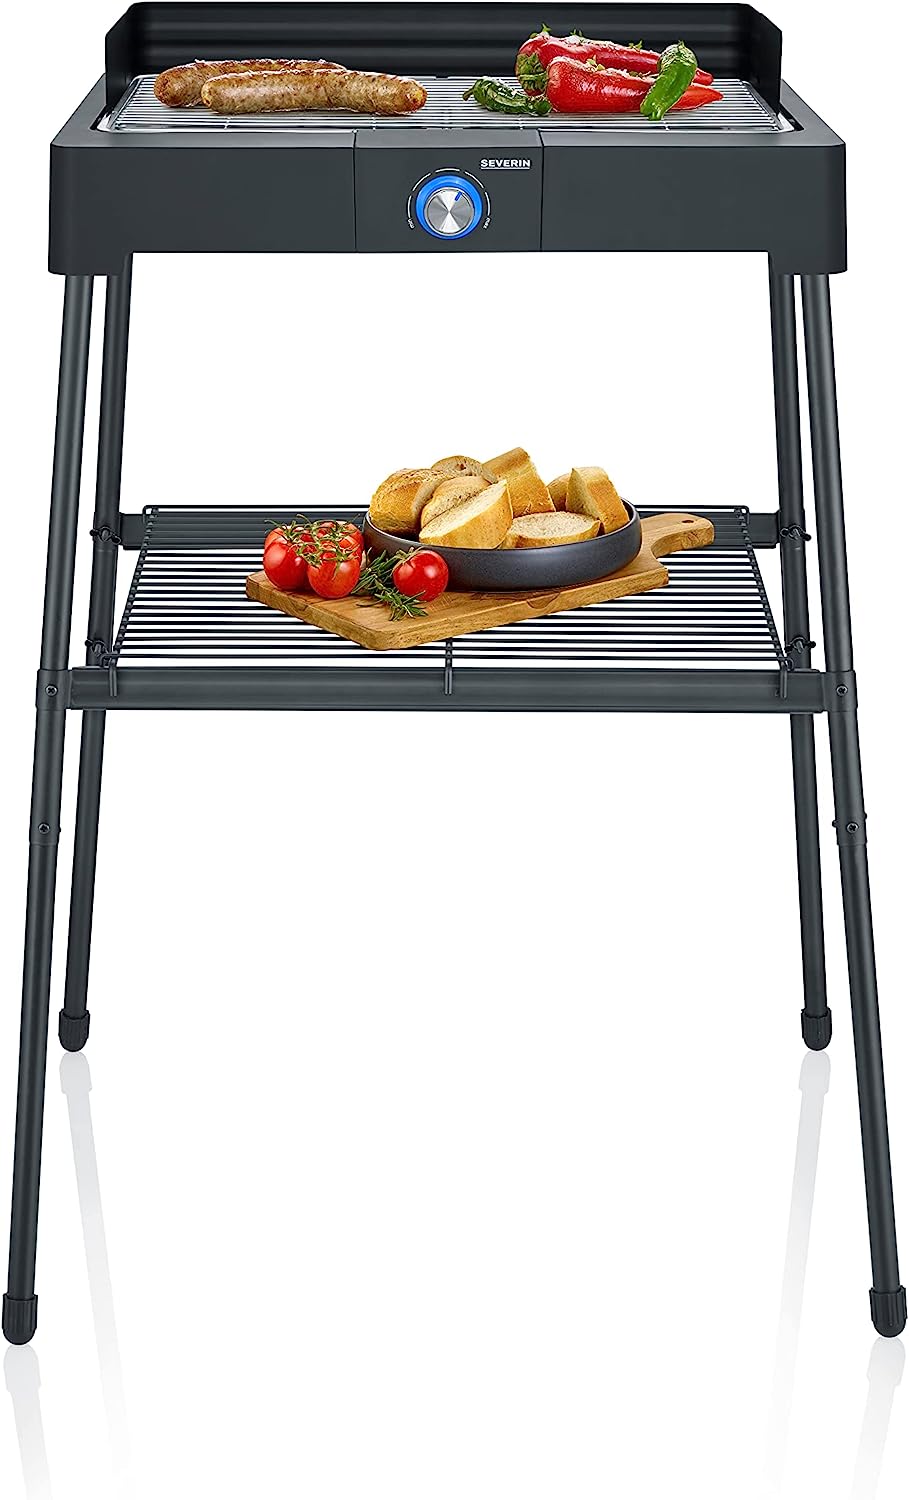 Severin PG 8566 Standing Grill with Stainless Steel Grill and Stand Frame and Storage Grill, Electric Grill with Quick Grill Start, Balcony Grill Without Risk of Burning, Black